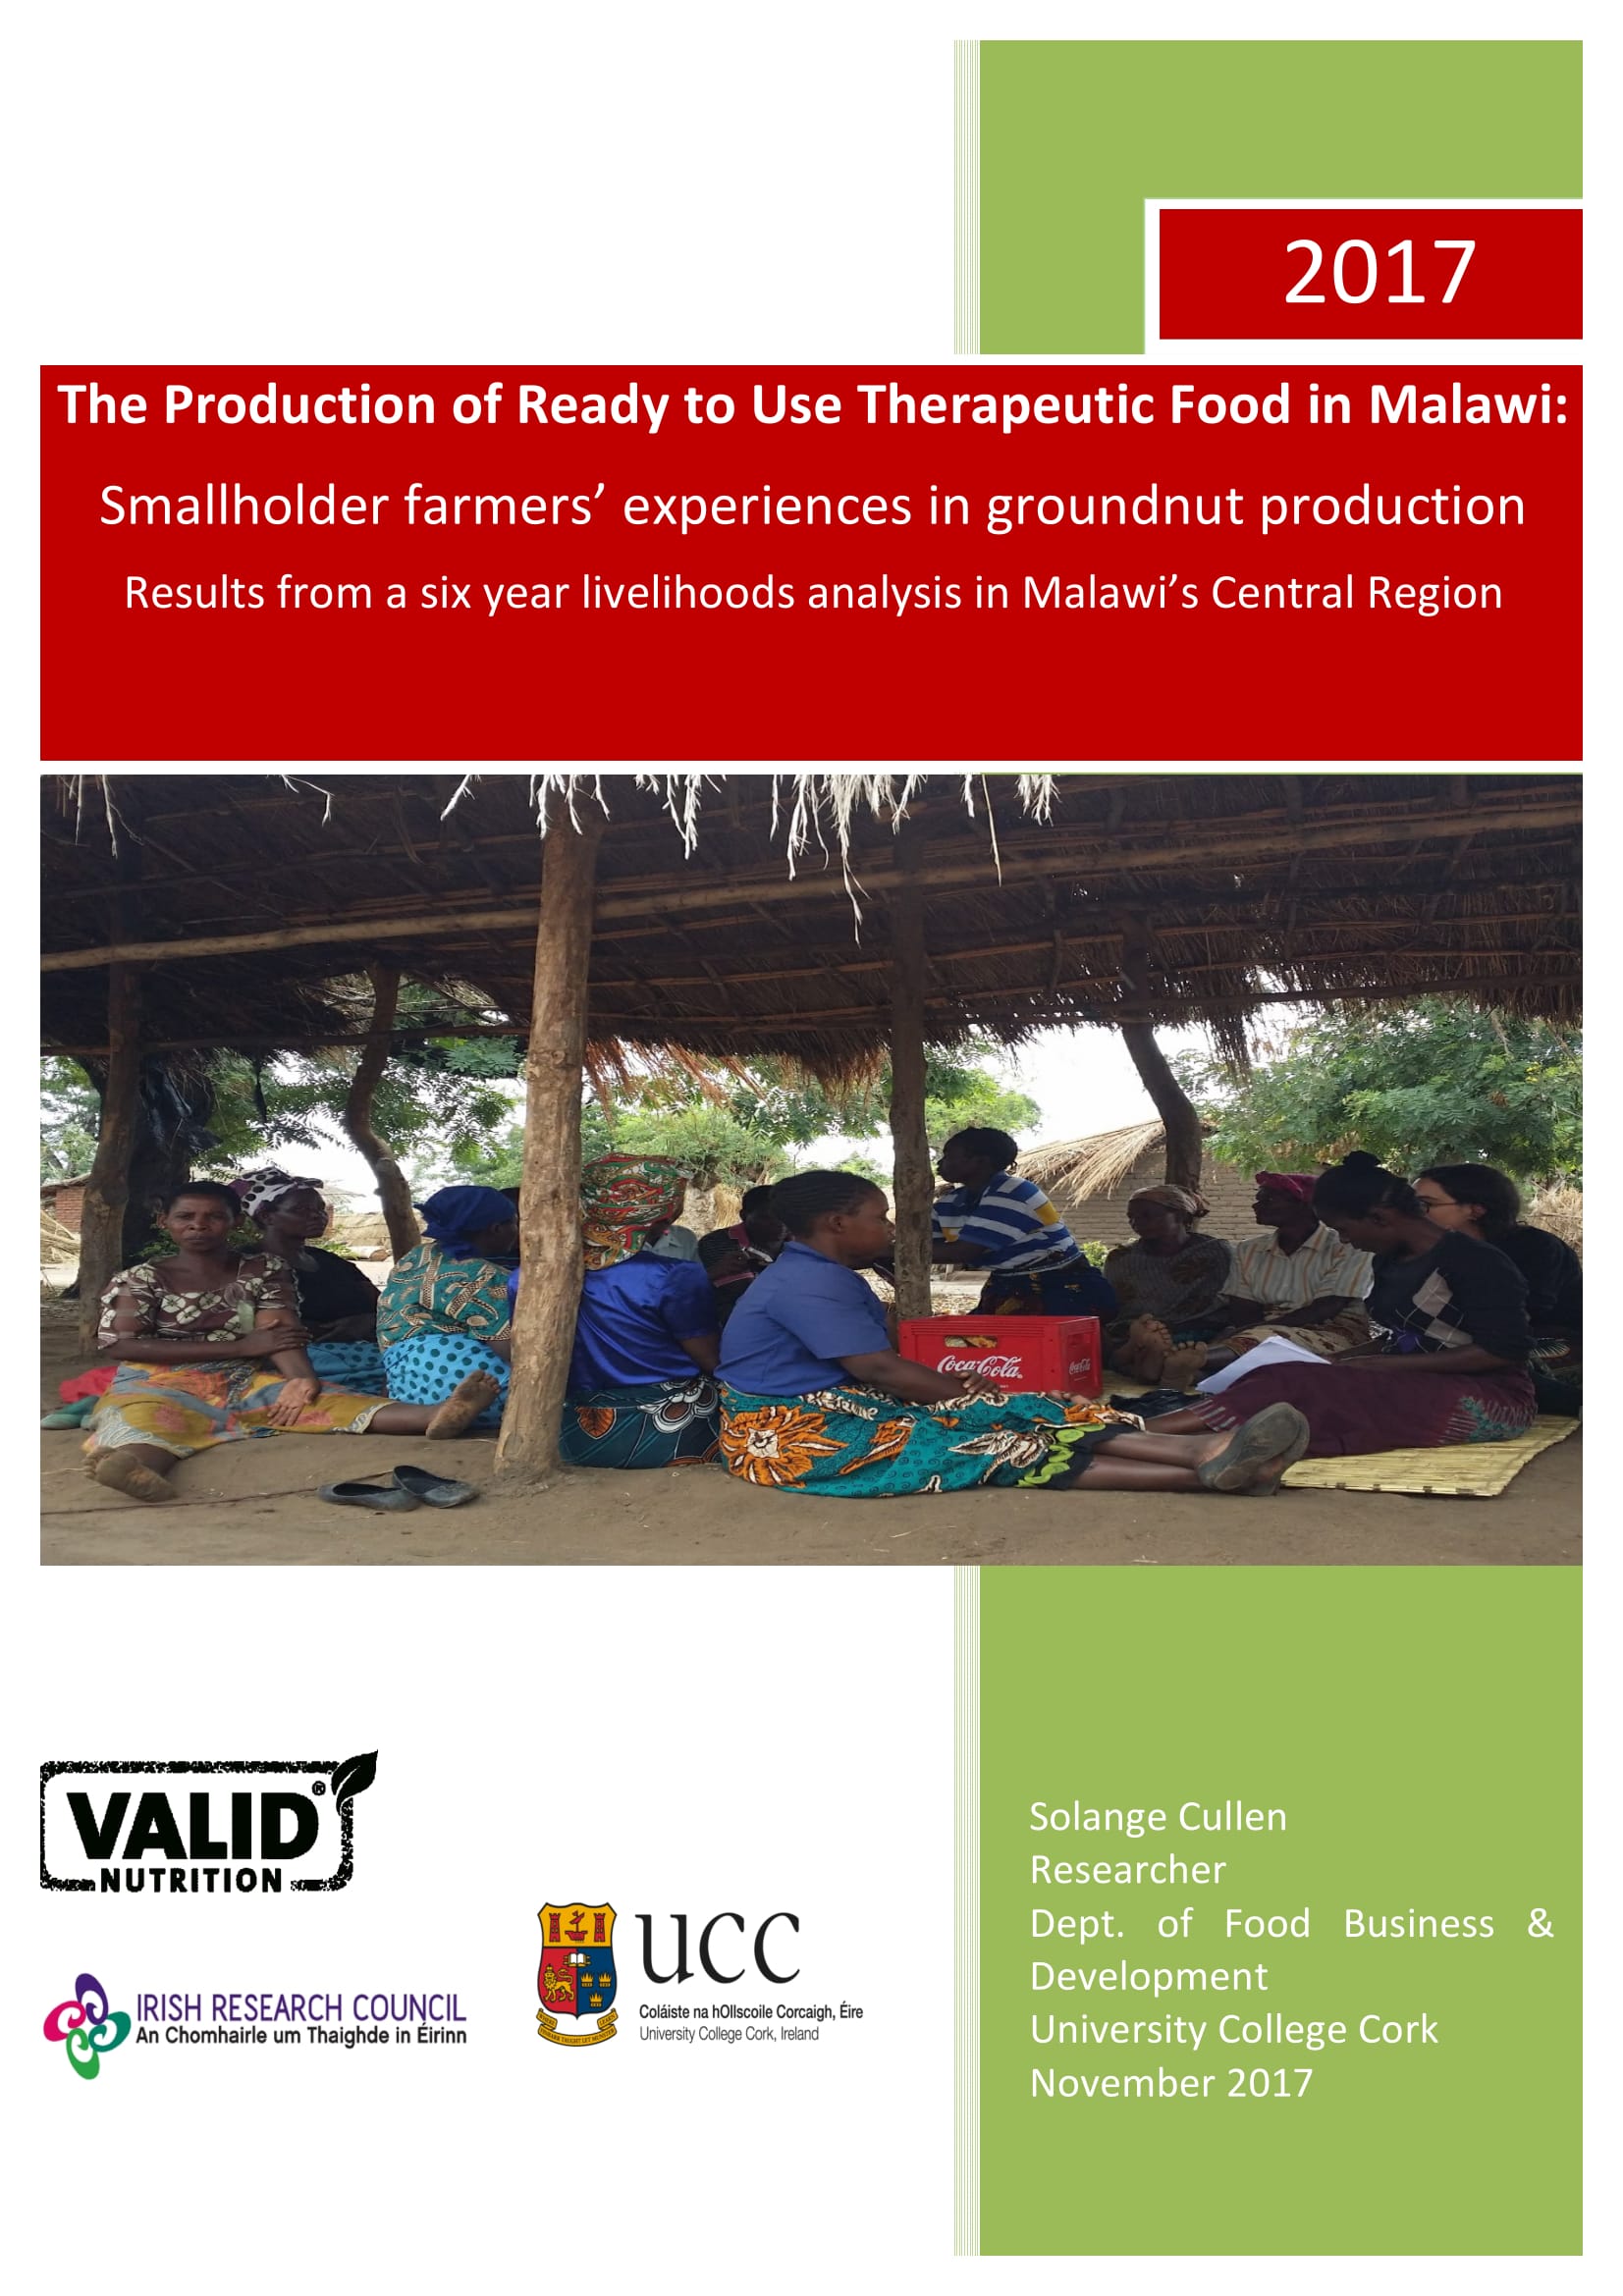 UCC’s Department of Food Business & Development collaborates with Valid Nutrition in research to combat malnutrition and support livelihoods in Malawi: Meeting on 20th November